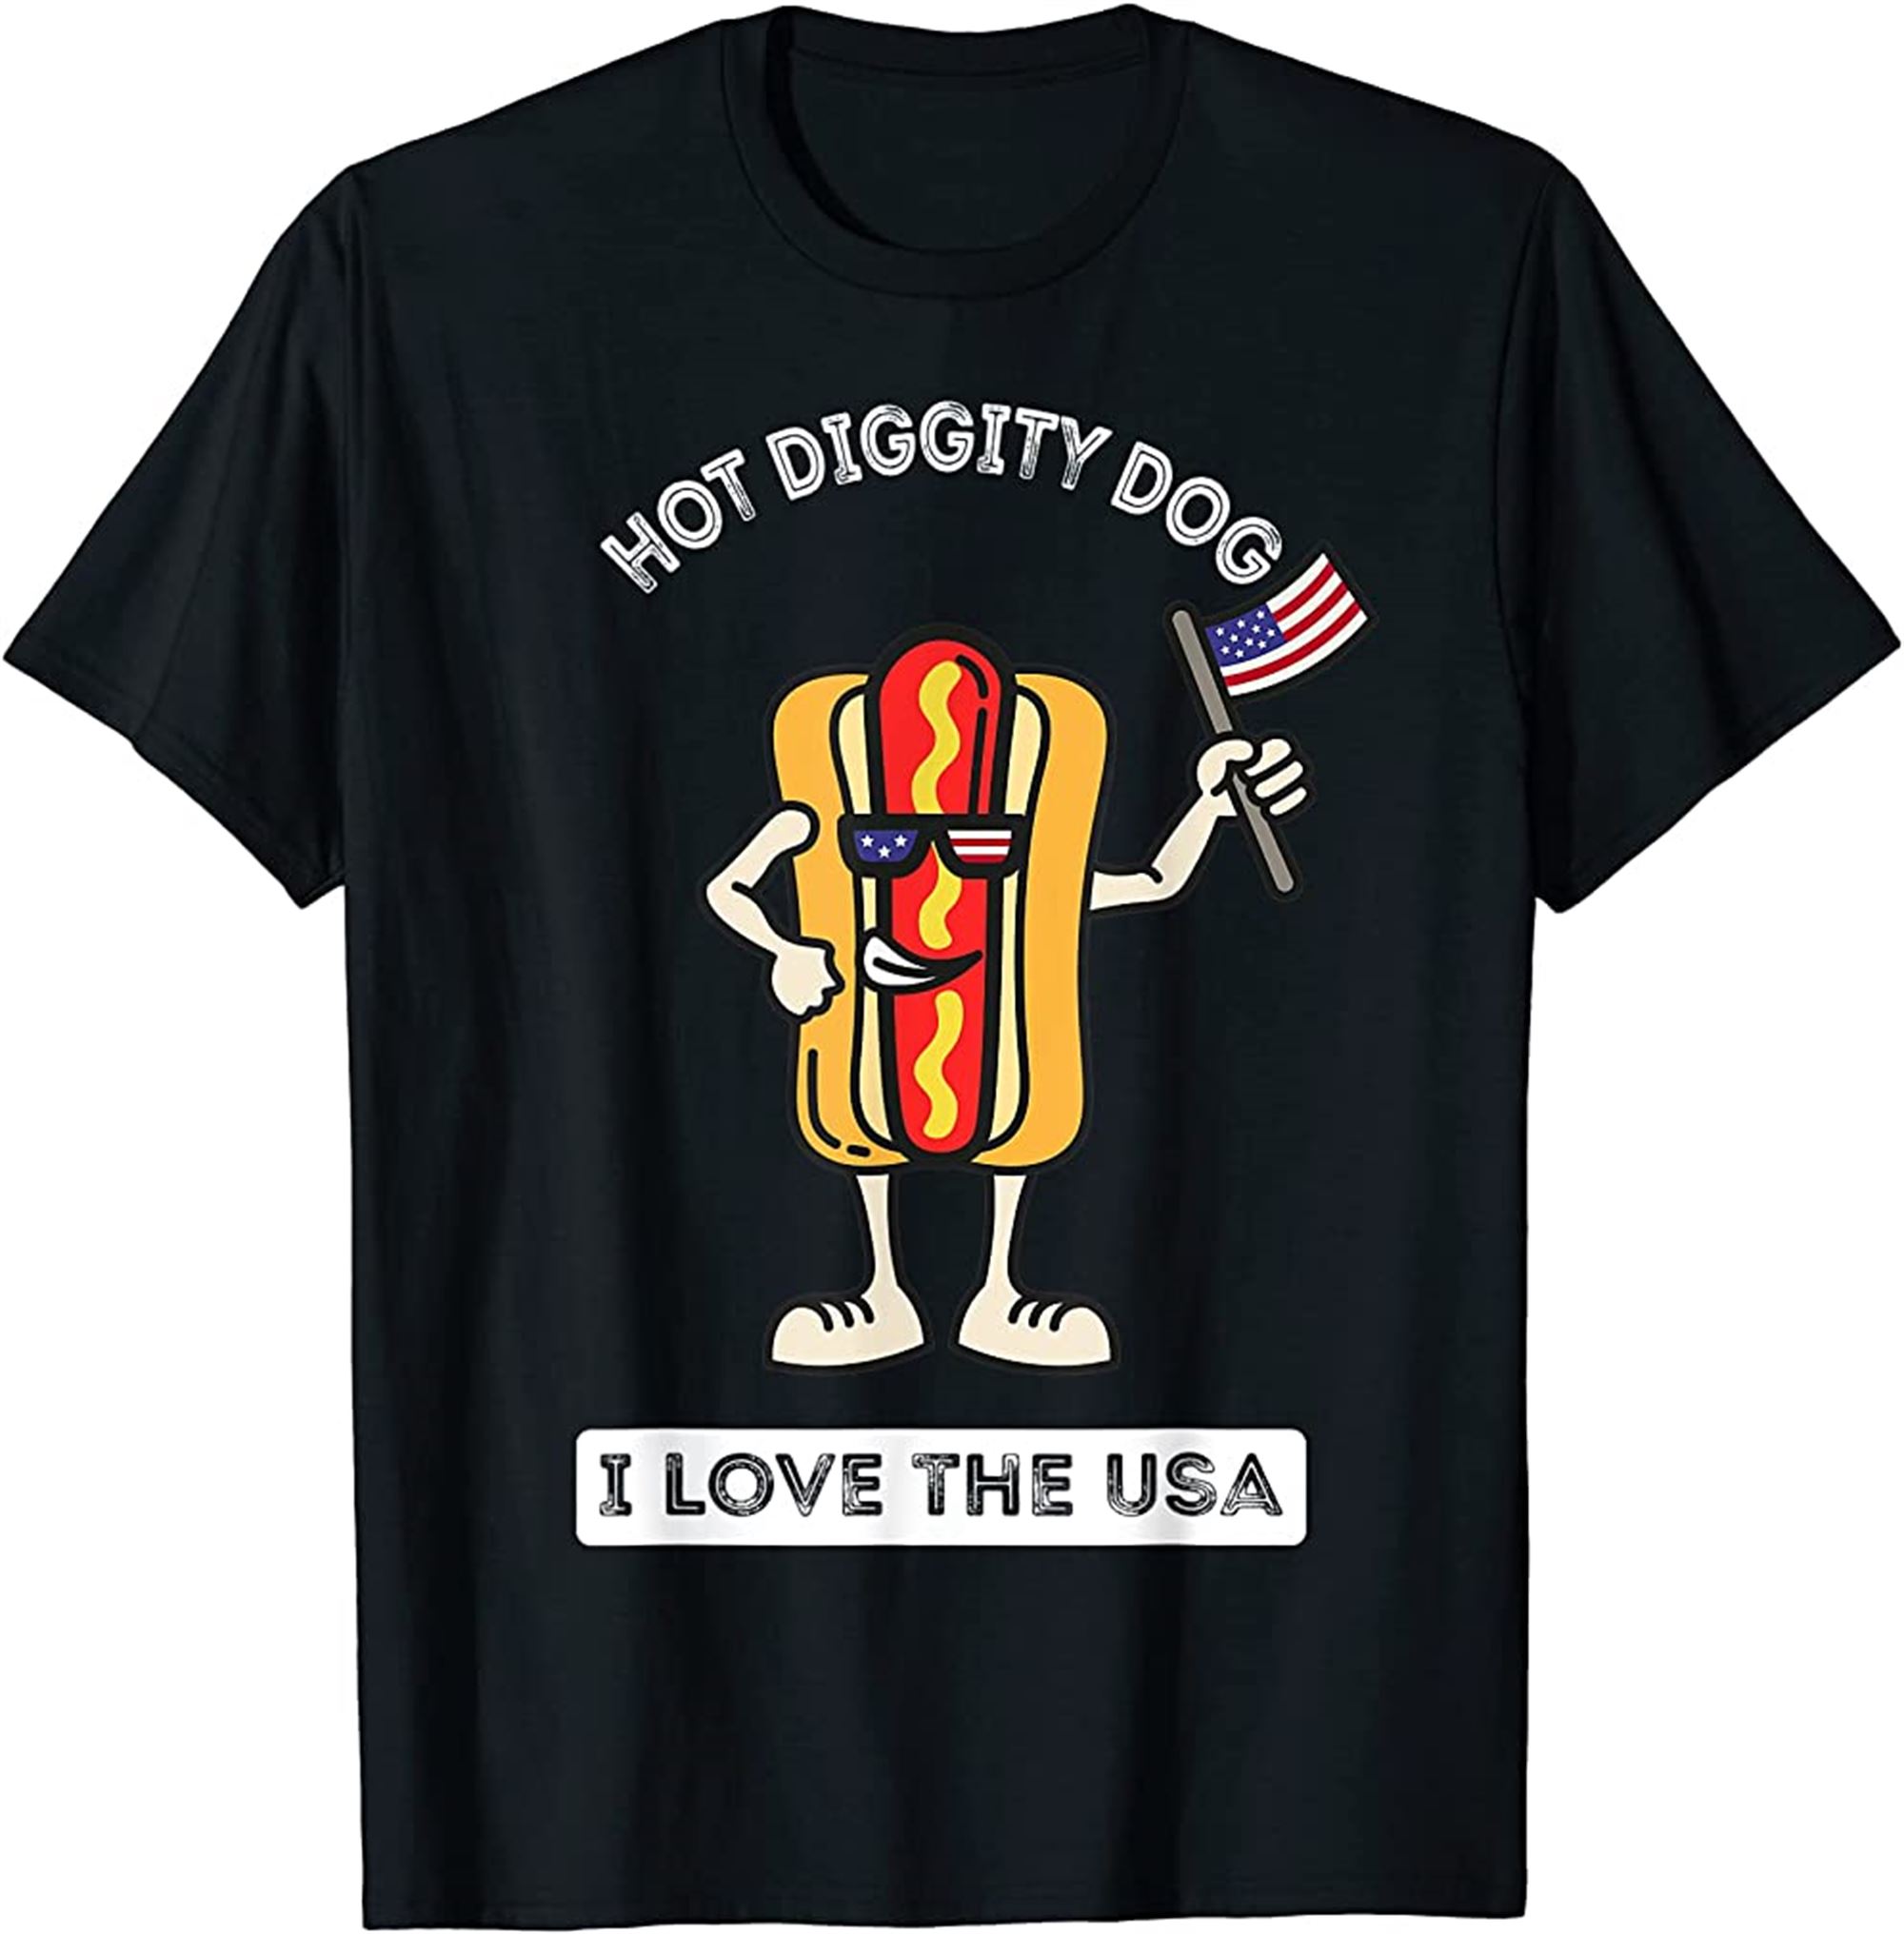 Hot Diggity Dog July 4th Patriotic Bbq Picnic Cookout Funny T-shirt Plus Size Up To 5xl